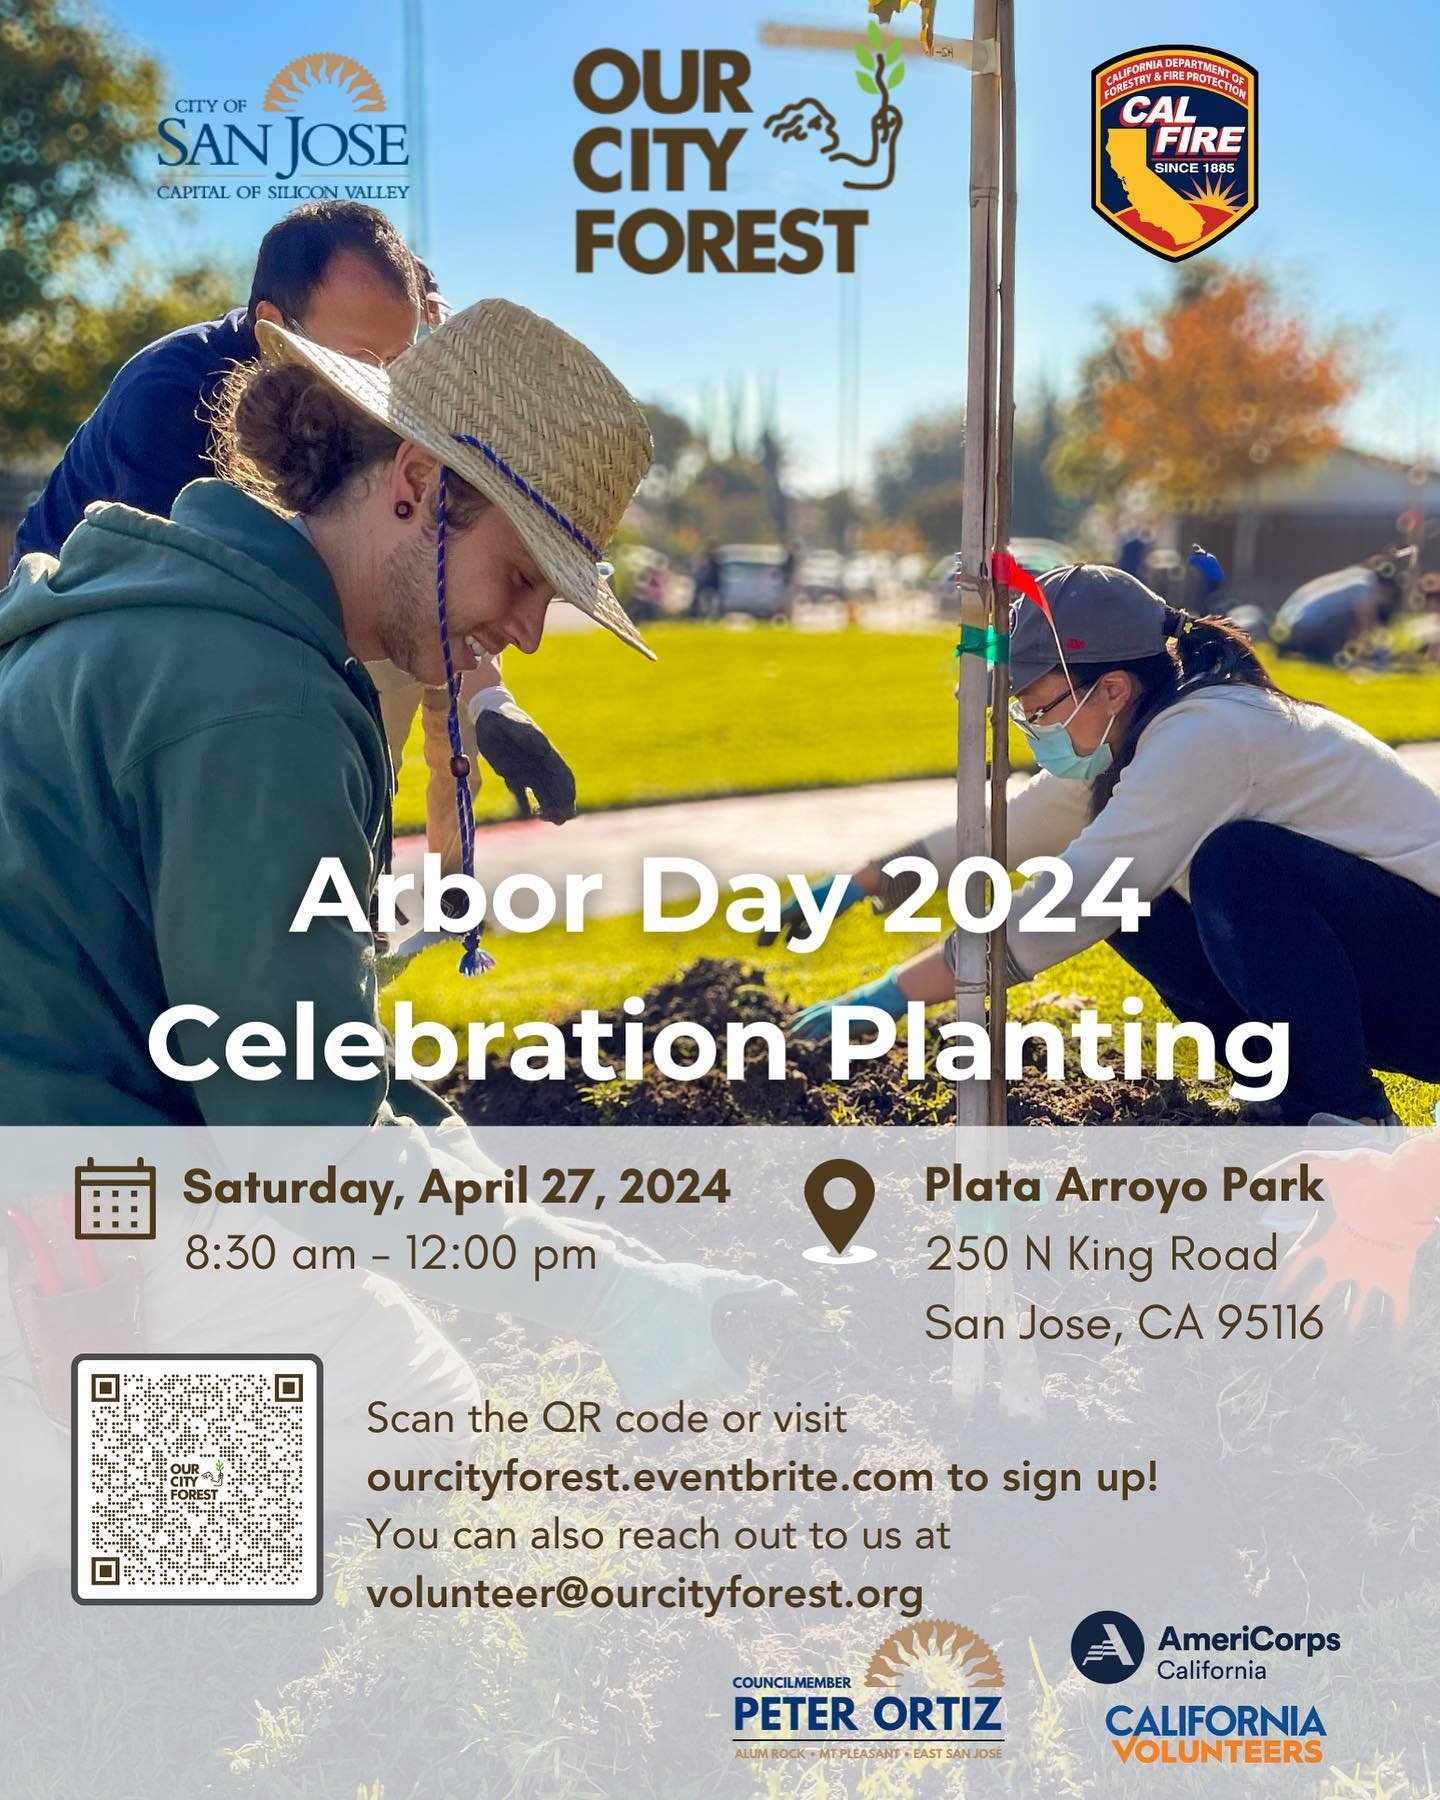 We are excited to see you at our Arbor Day Celebration Planting this Saturday! 🌳

Join us! 💚 Sign up via our Eventbrite link below and in our bio.

https://www.eventbrite.com/e/arbor-day-celebration-planting-tickets-804231657537

.

.

.

. 
#ourci